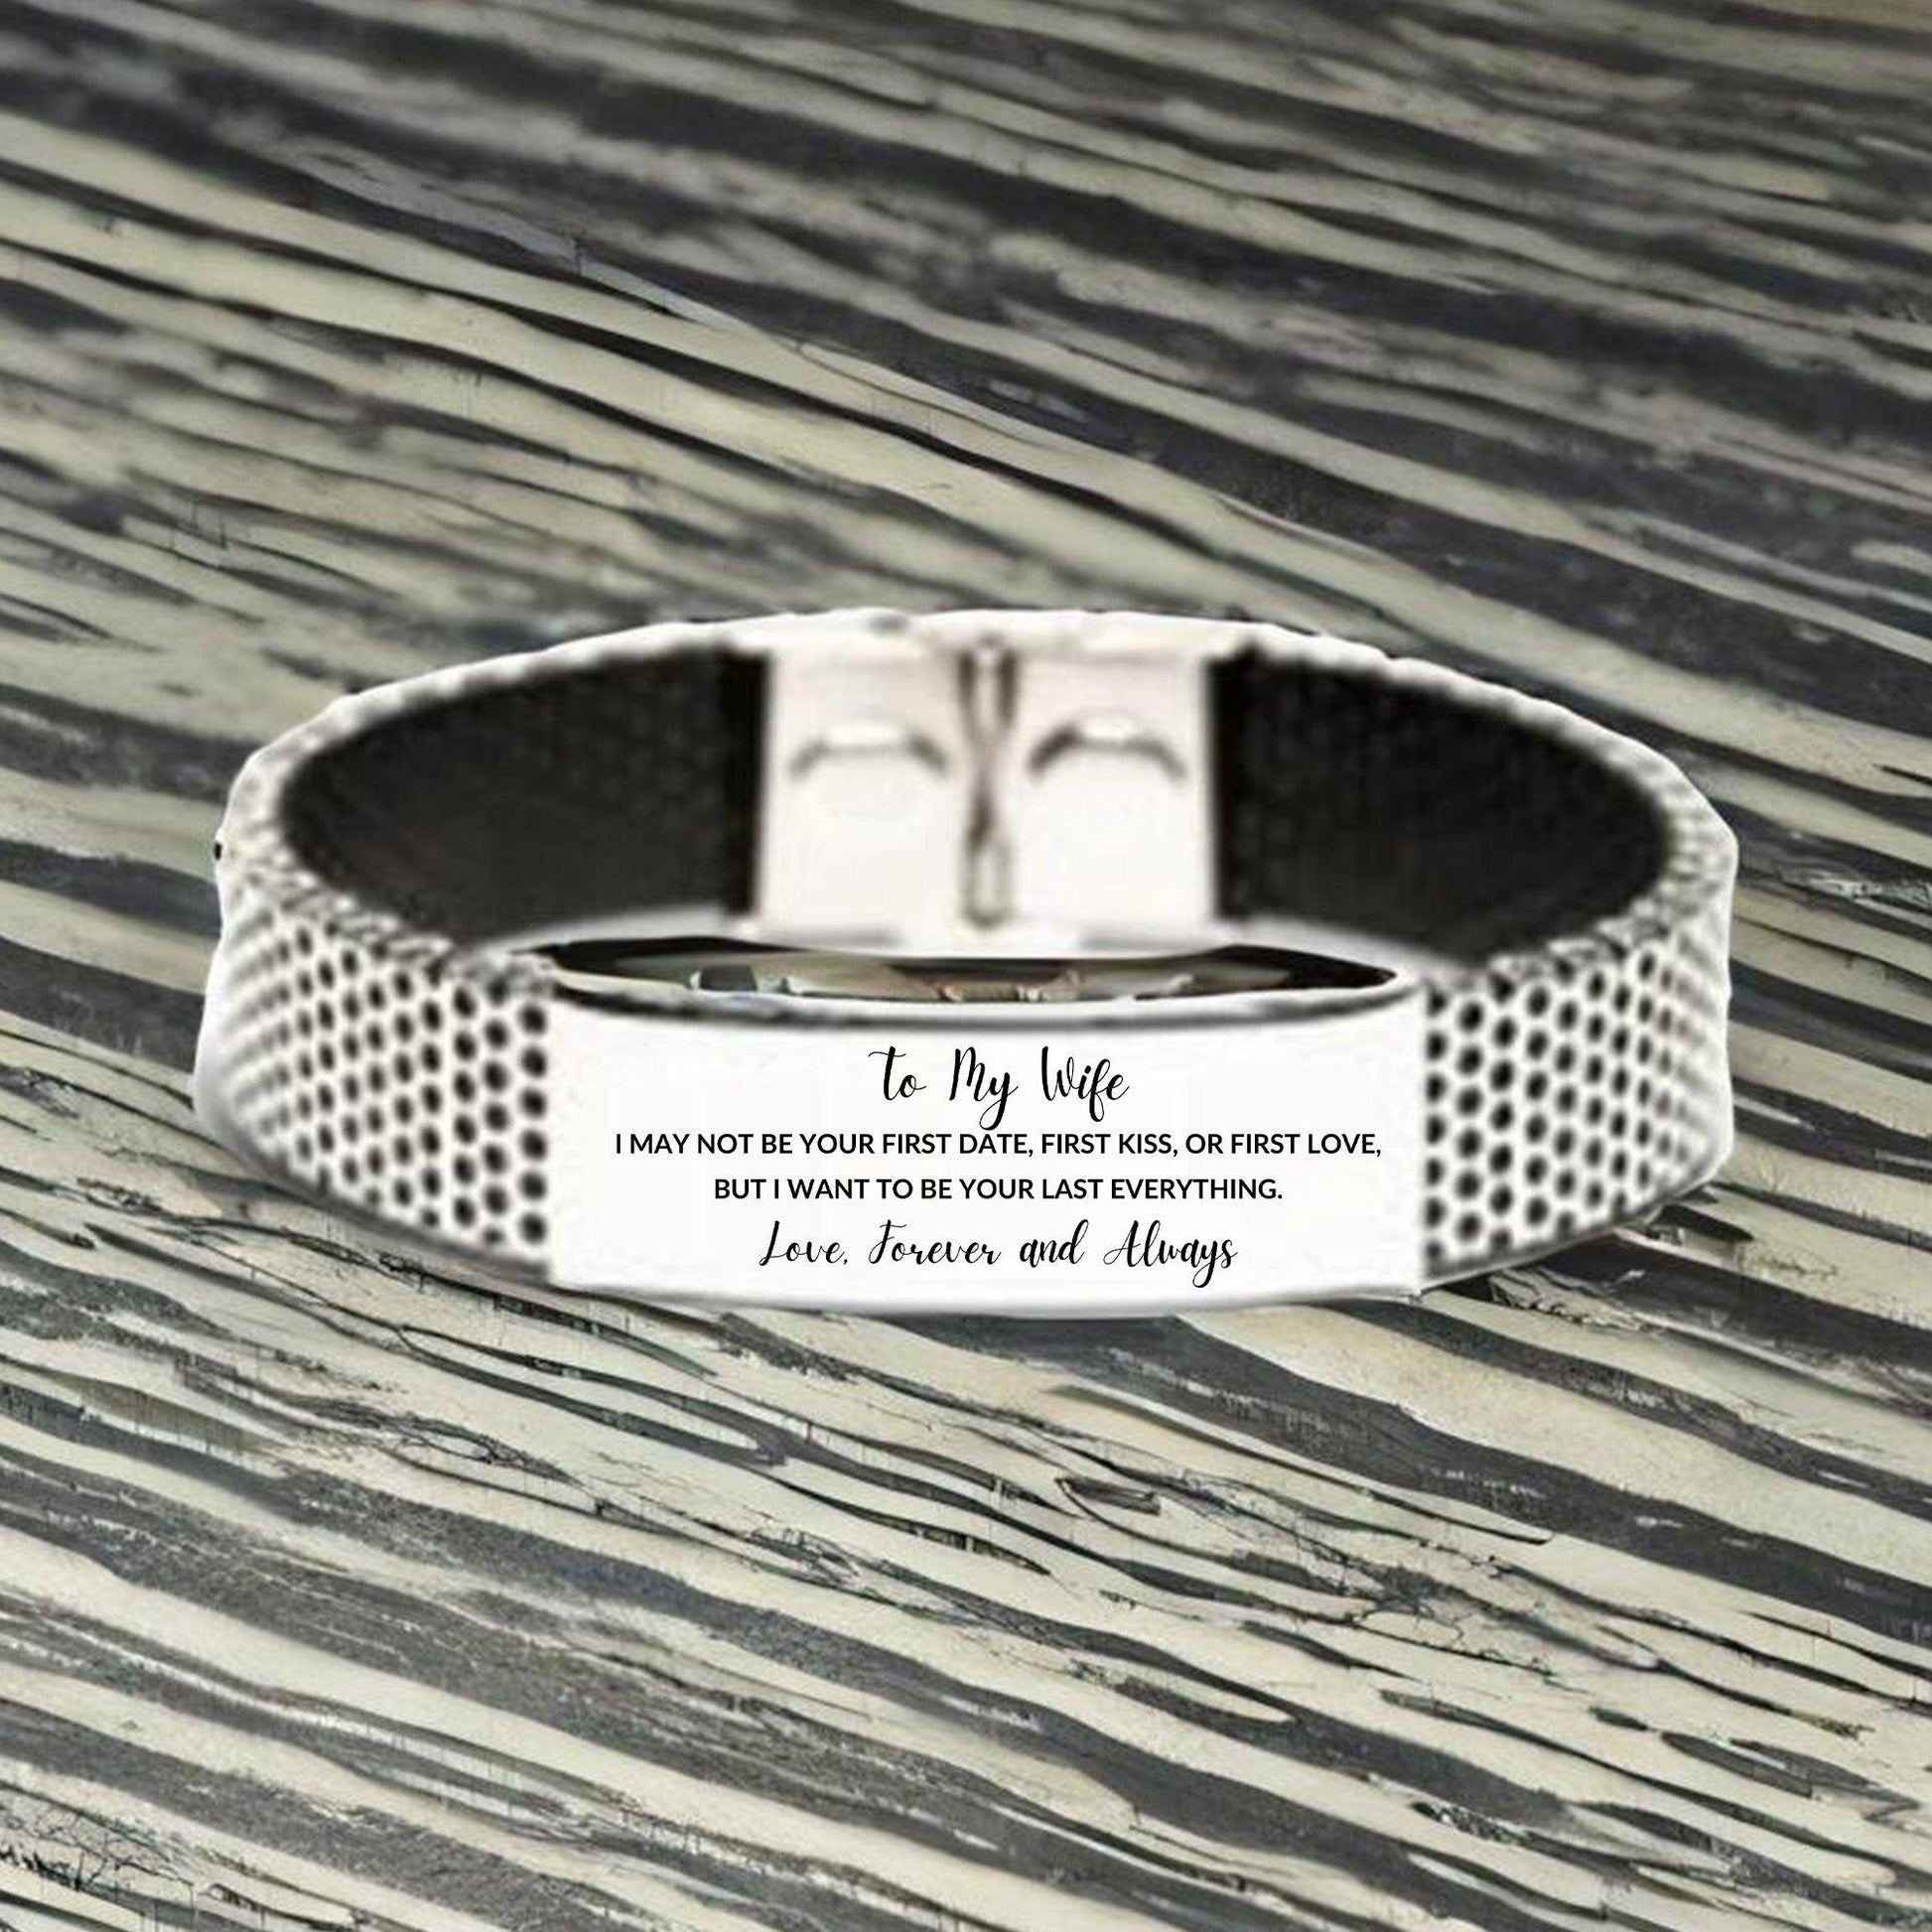 To My Wife I Want to Be Your Last Everything Engraved Stainless Steel Mesh Bracelet, Romantic Birthday, Valentine, Gifts - Mallard Moon Gift Shop